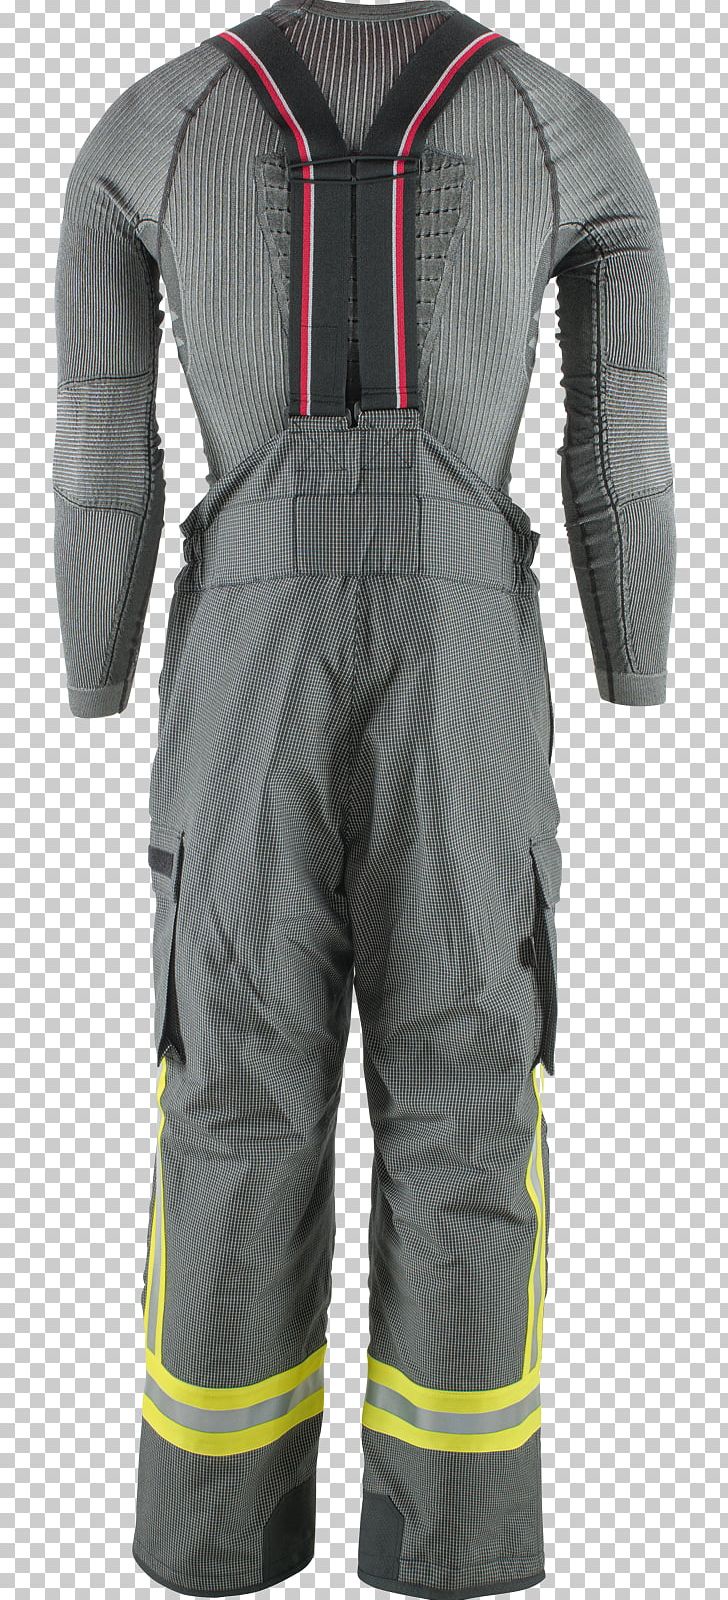 Hockey Protective Pants & Ski Shorts Overall Clothing Motorcycle Grey PNG, Clipart, Cars, Clothing, Fire Hose, Grey, Hockey Free PNG Download